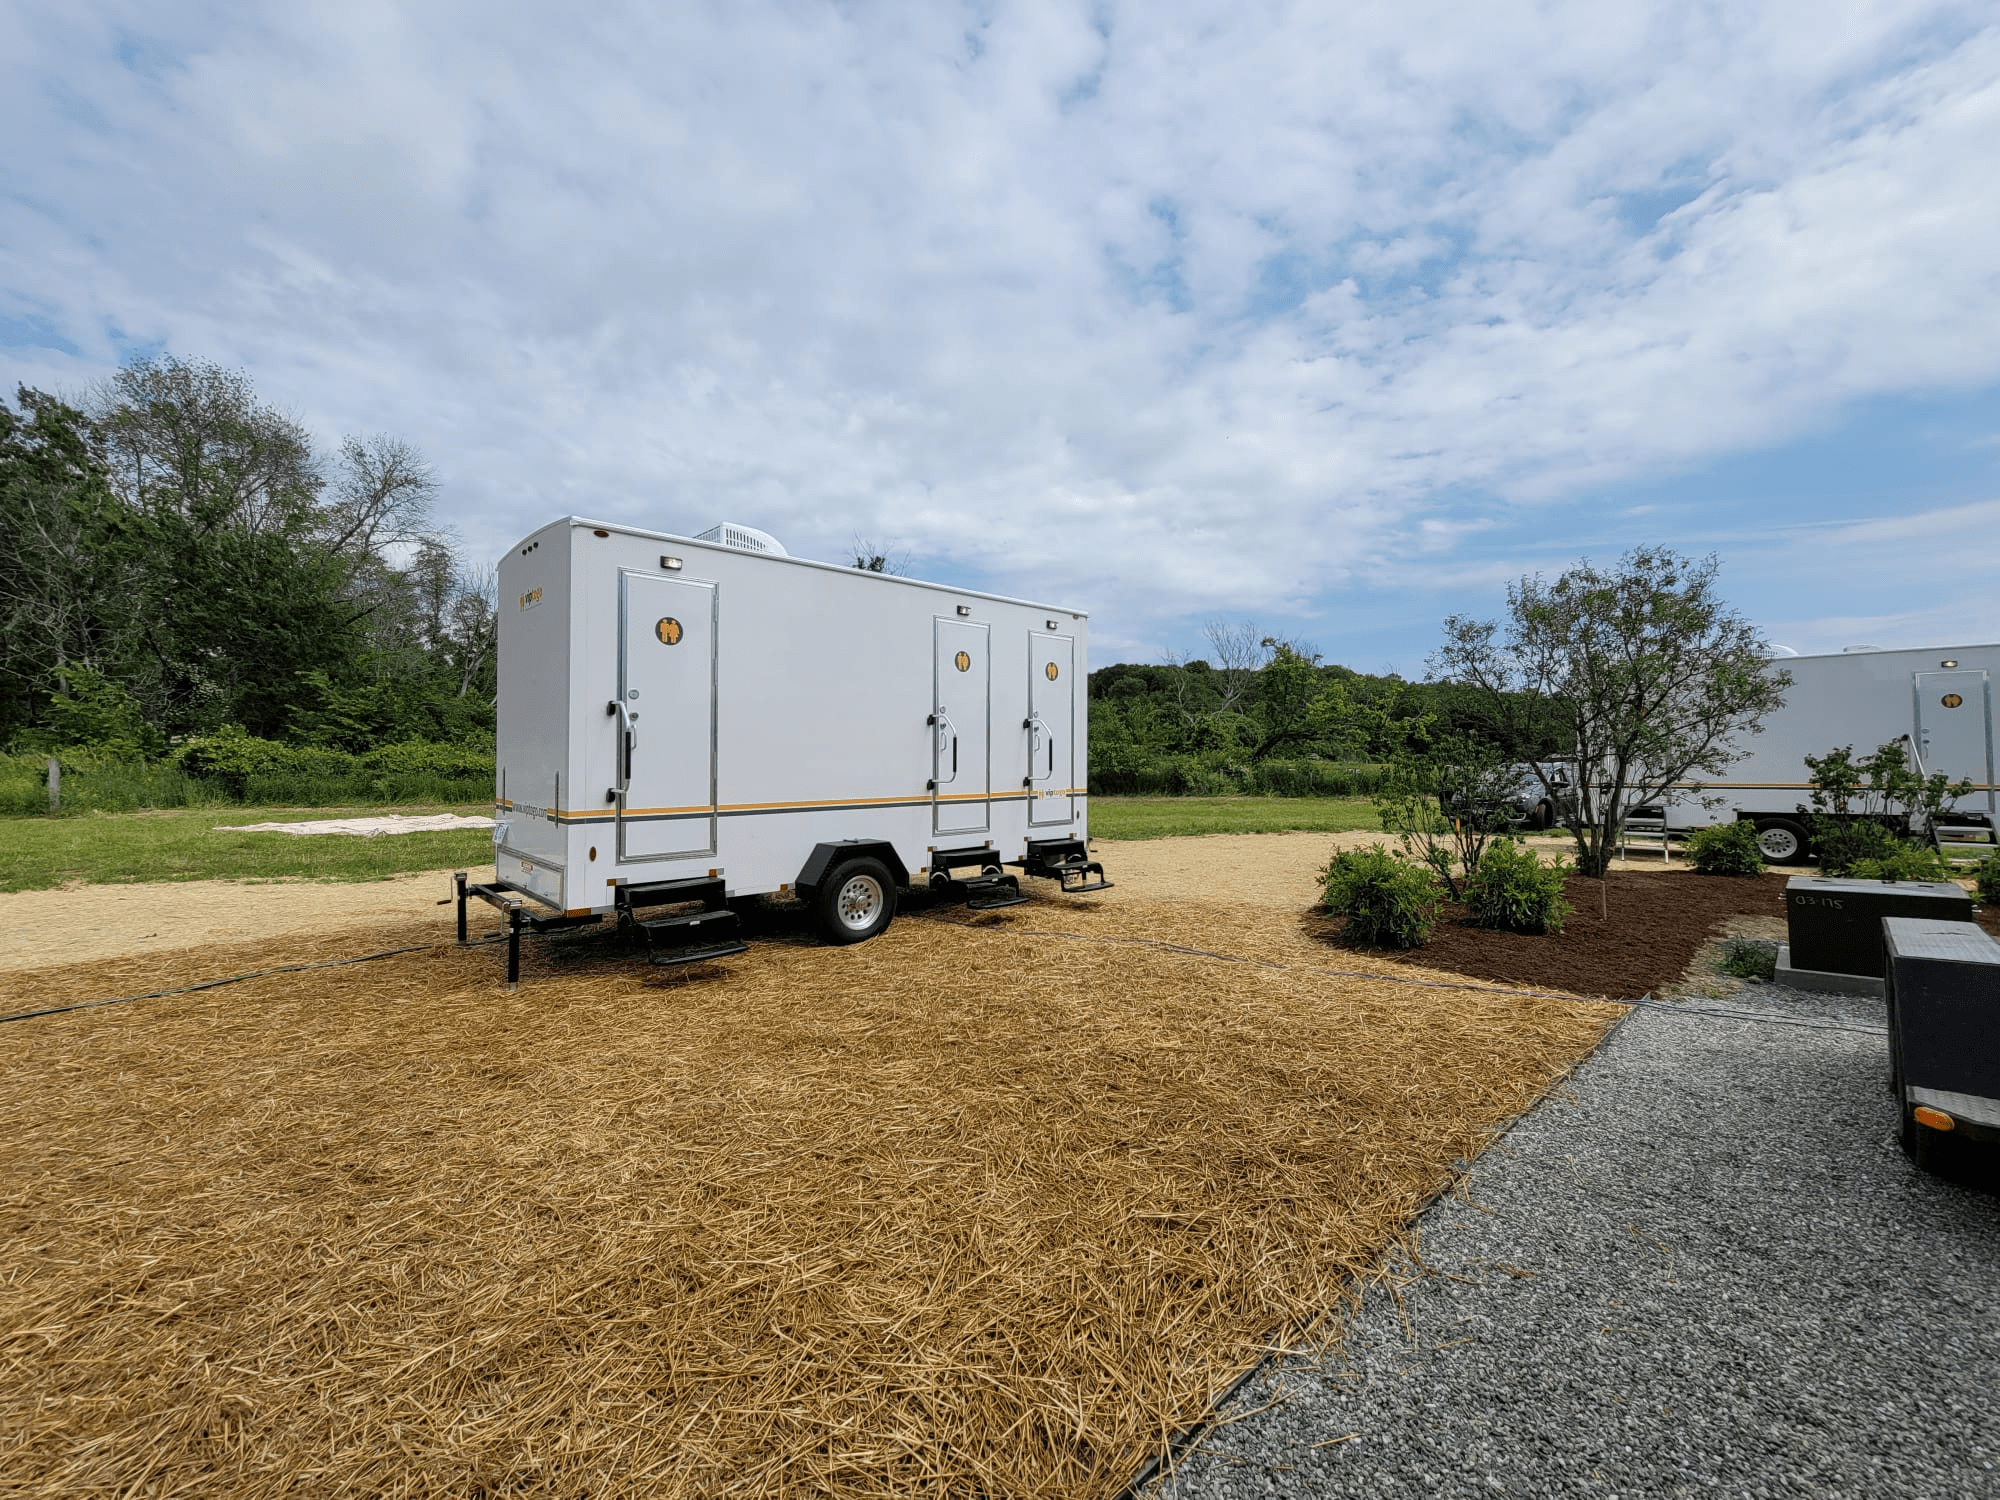 restroom trailer on wheels for farm workers